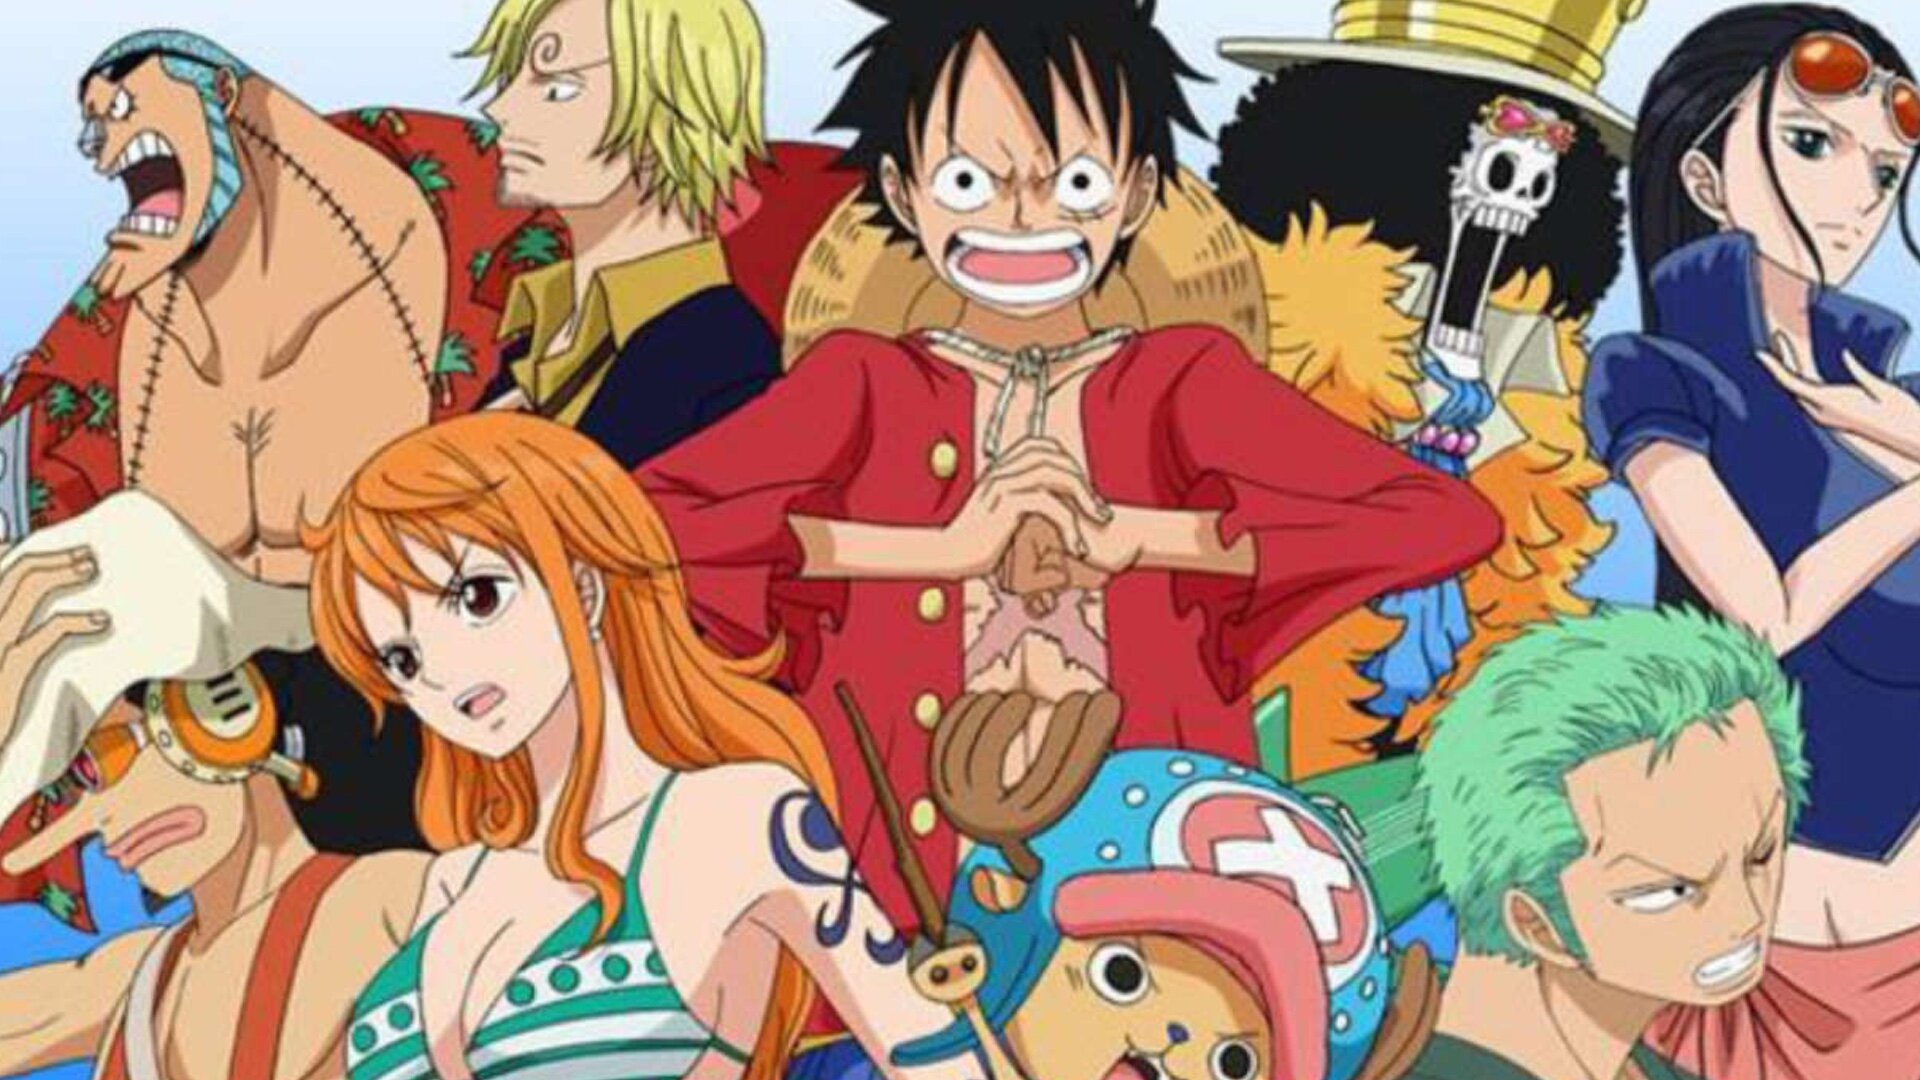 One Piece: Is Netflix's anime adaptation for kids? Look at the age rating